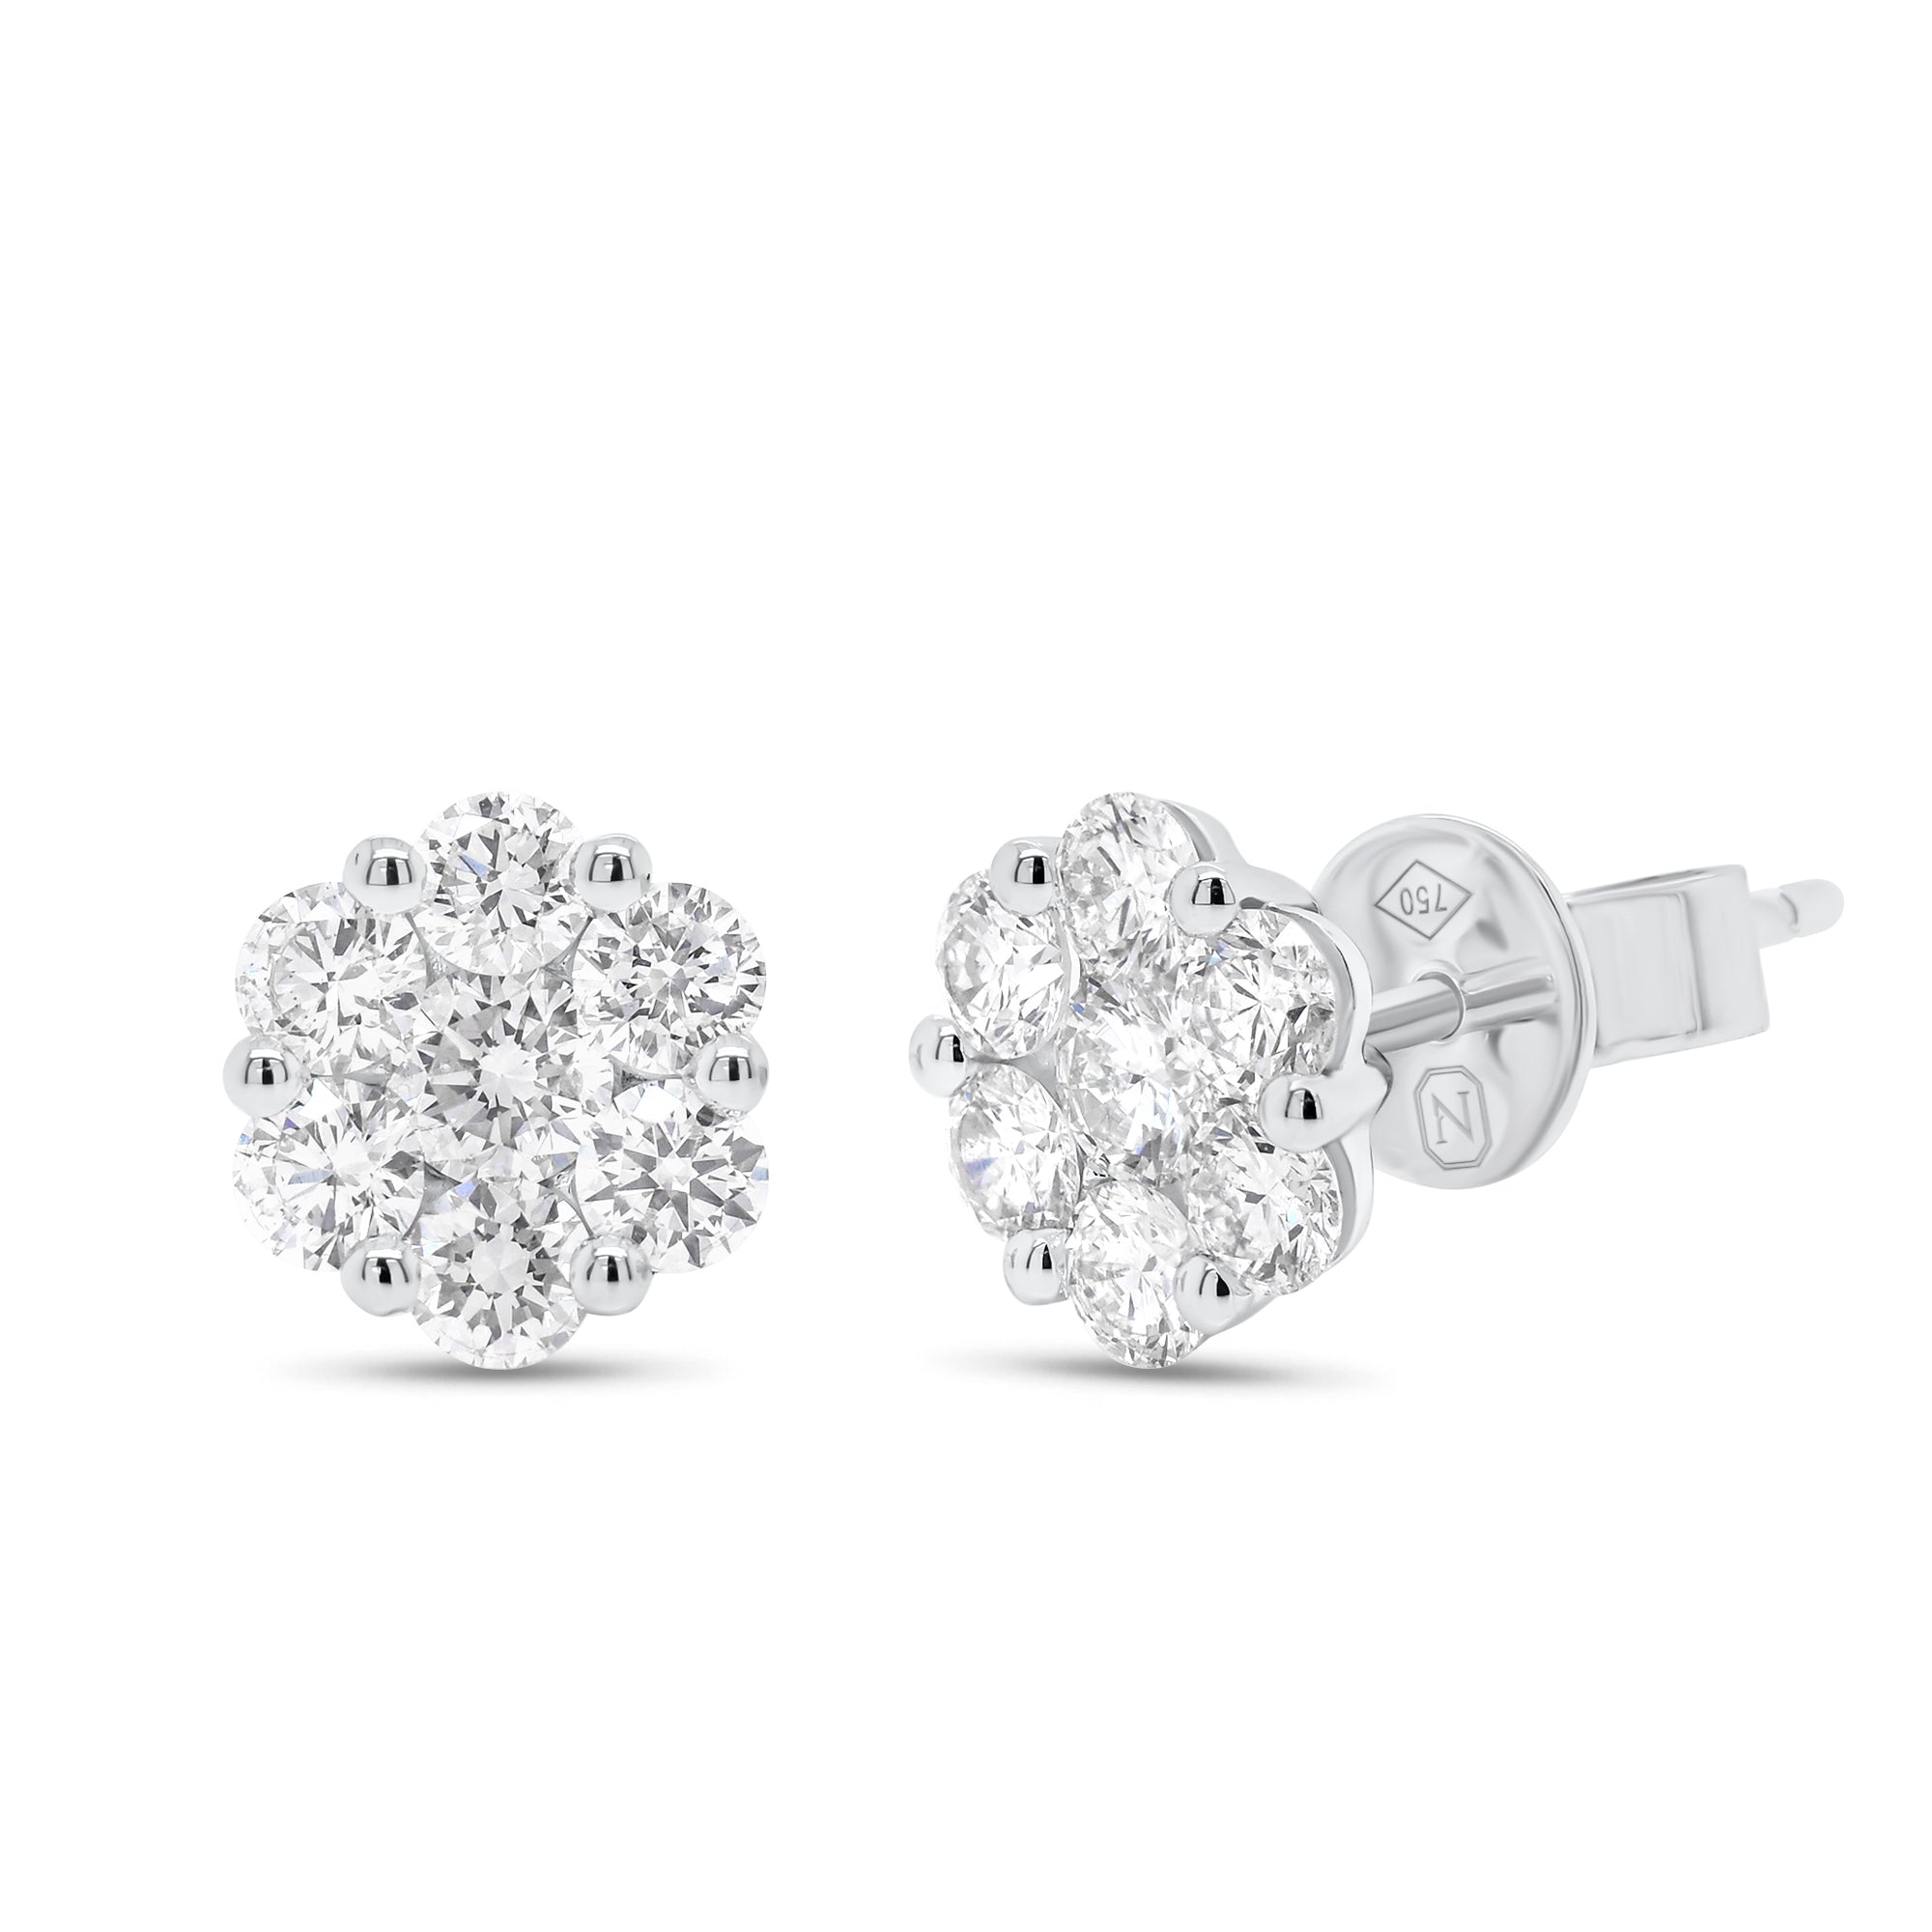 1.06 ct Diamond Cluster Stud Earrings - 18K white gold weighing 1.87 grams  - 2 round diamonds weighing 0.22 carats  - 12 round diamonds weighing 0.84 carats